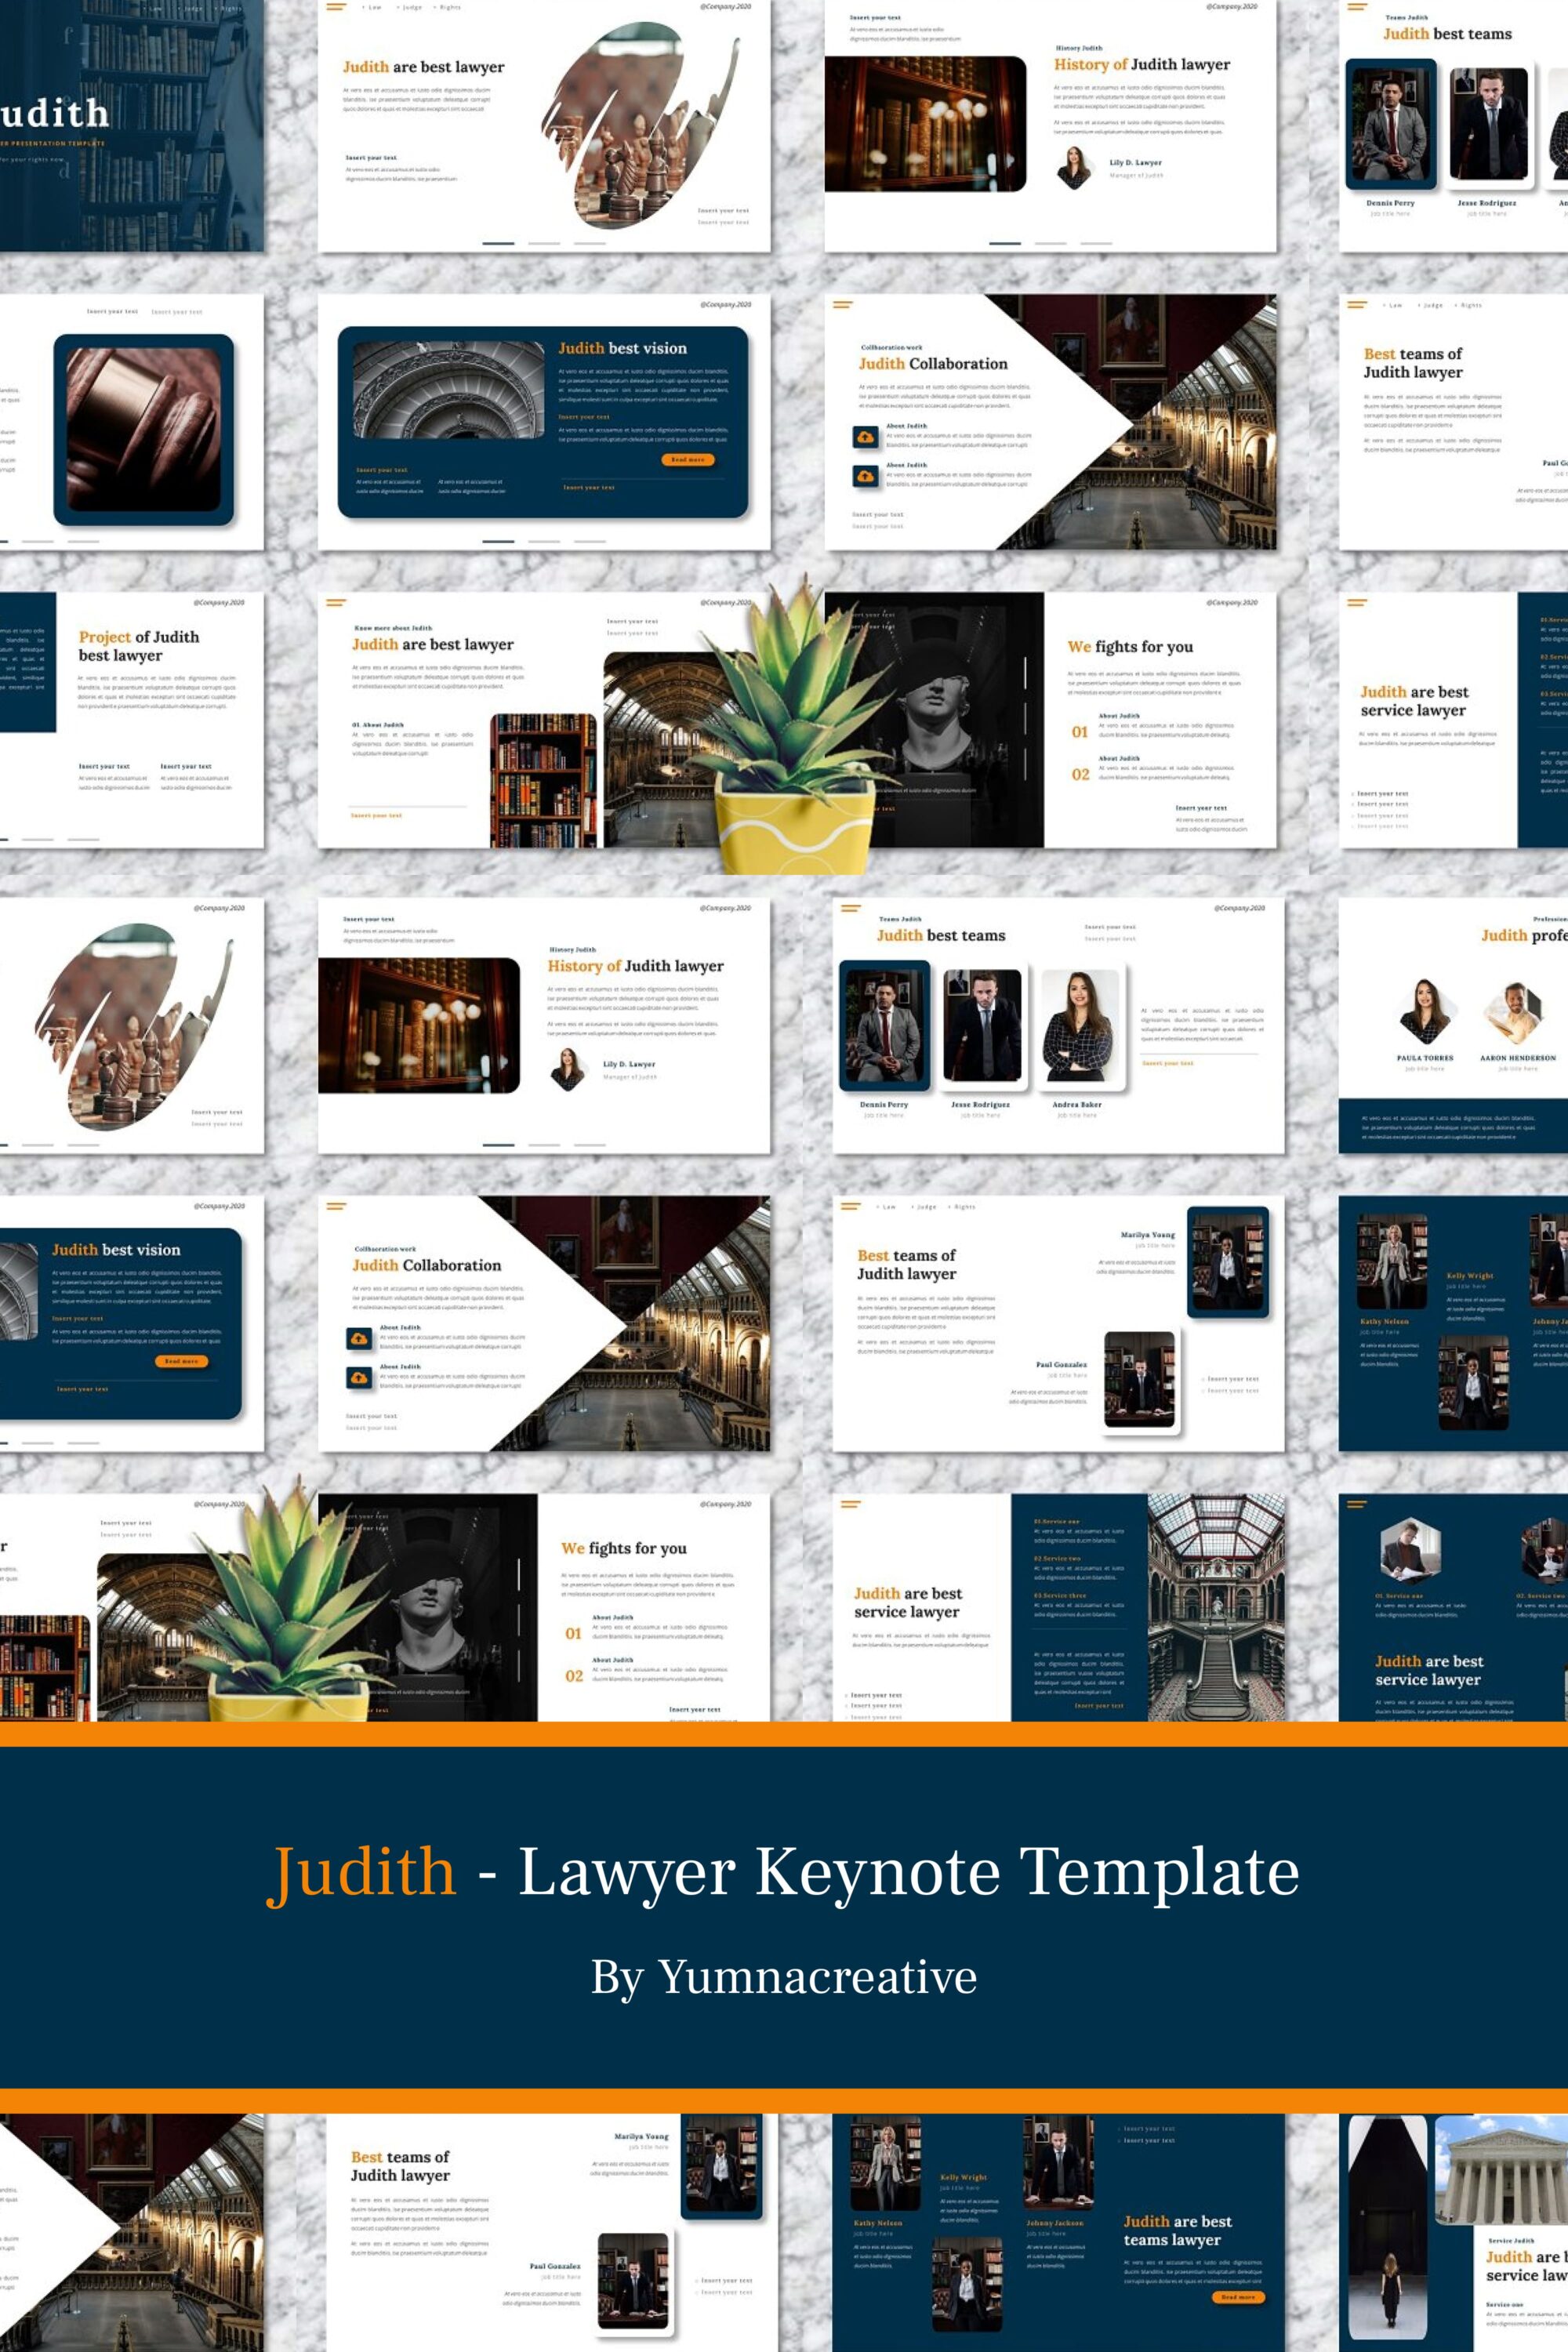 Judith lawyer keynote template - pinterest image preview.